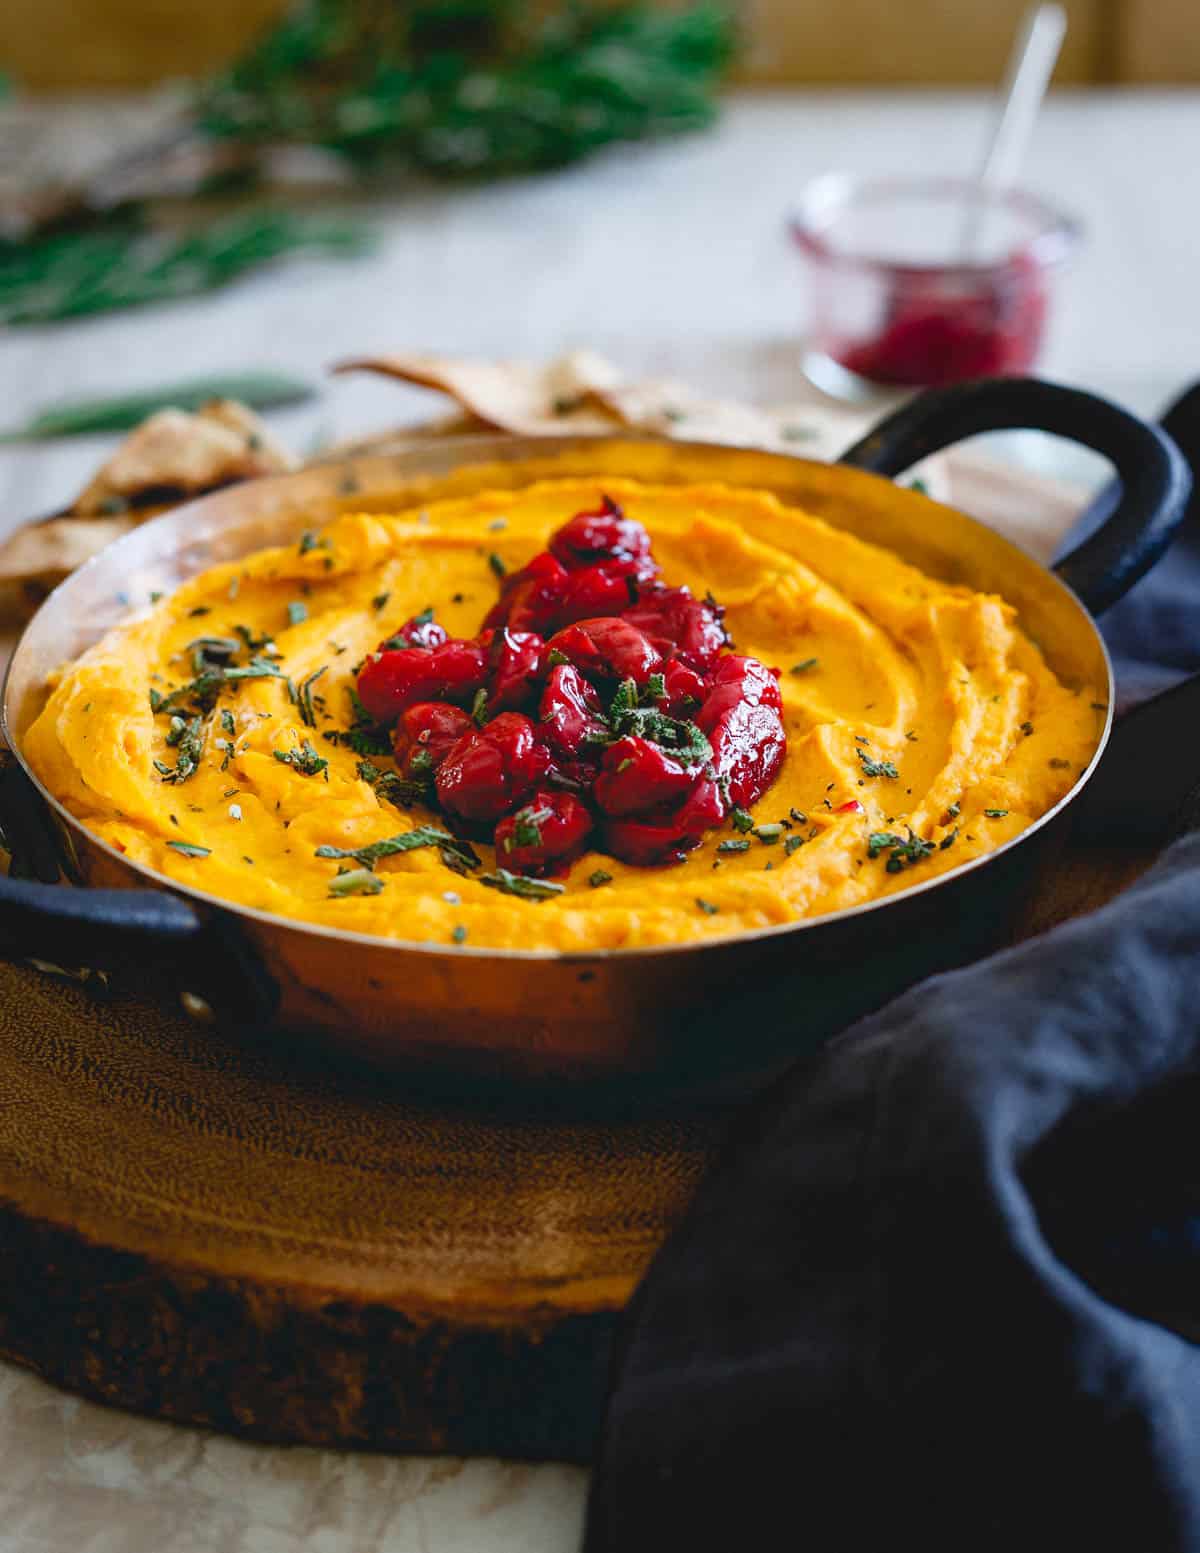 This butternut squash dip is made with goat cheese and cream cheese for a super creamy texture then topped with a festive tart cherry compote. Serve it with some pita chips for the perfect holiday appetizer!